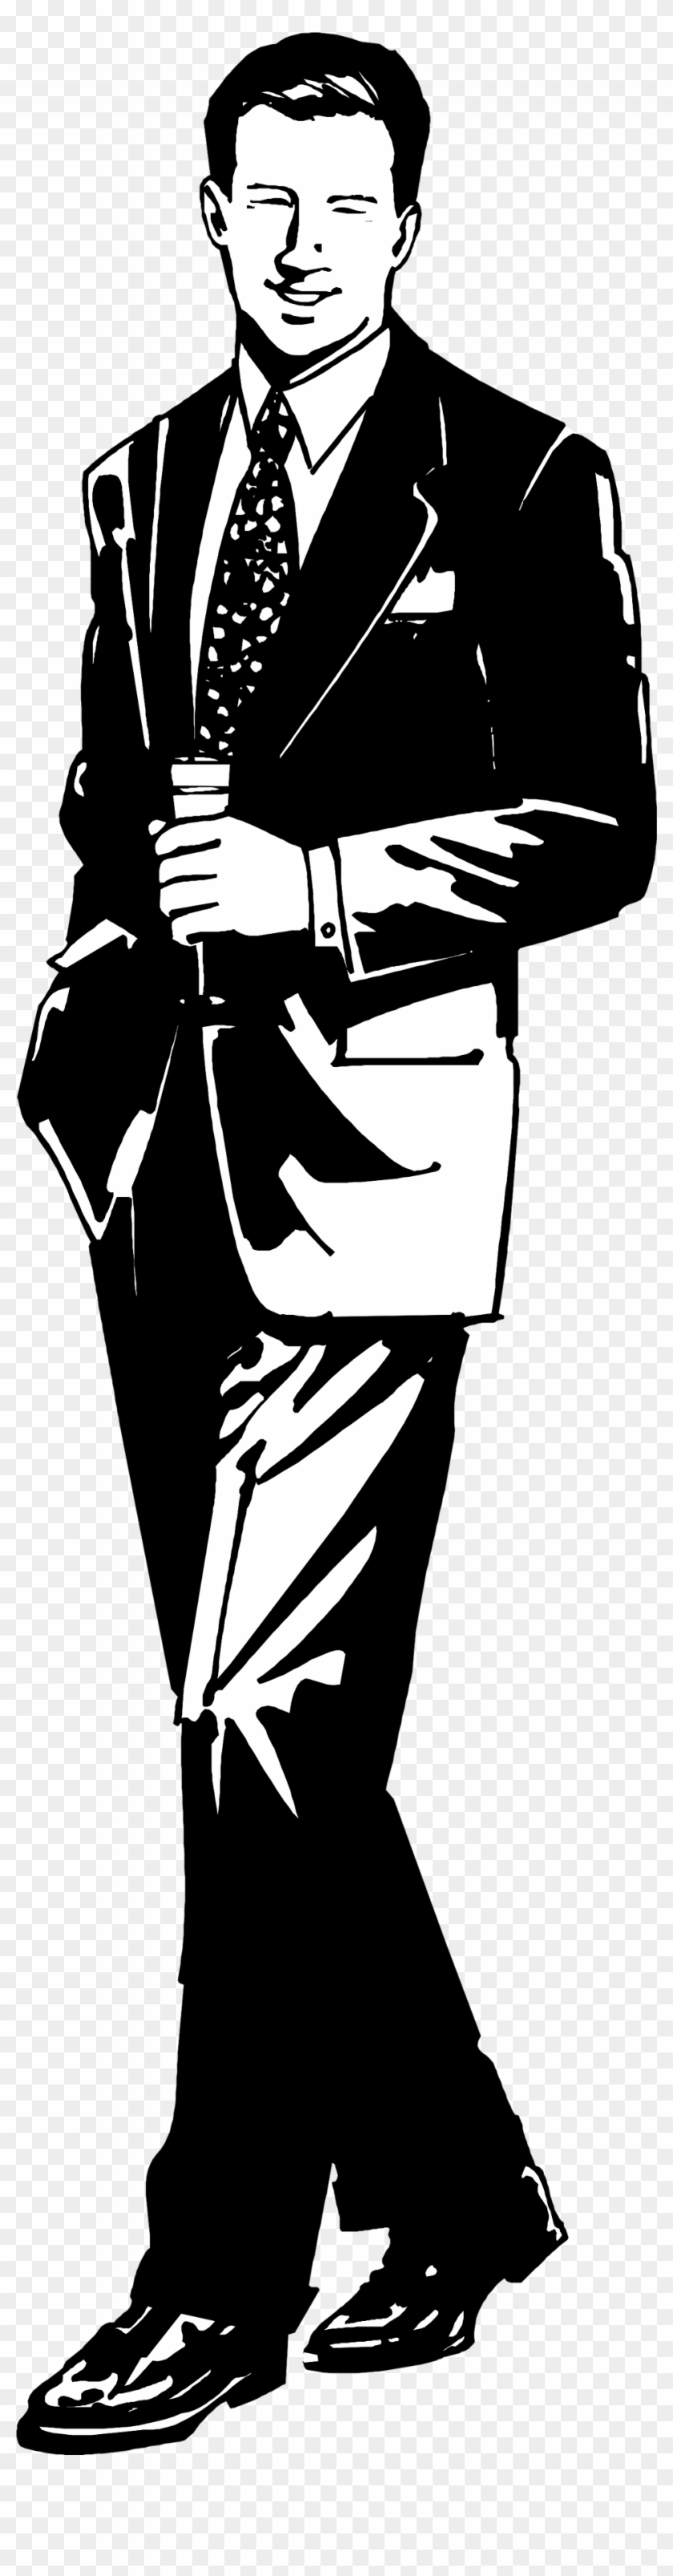 Male Clipart Handsome Man - Man In Suit Clipart Black And White - Png Download #2932360